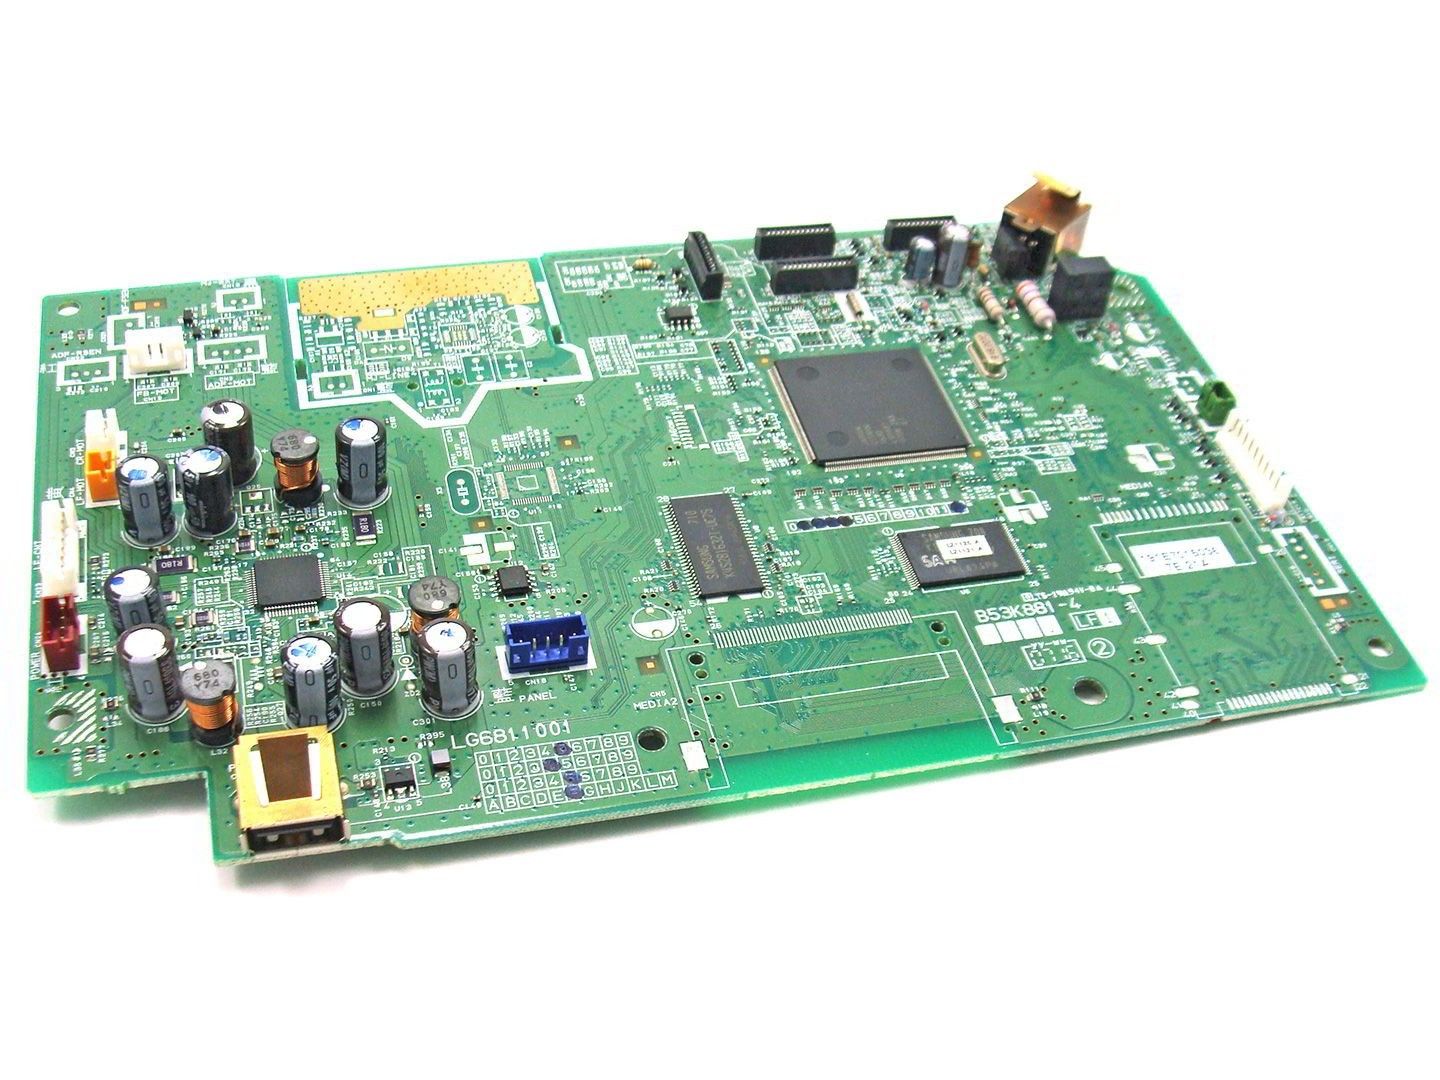 Brother MFC-250C Main Board (LT0287041) R - HPecas.com